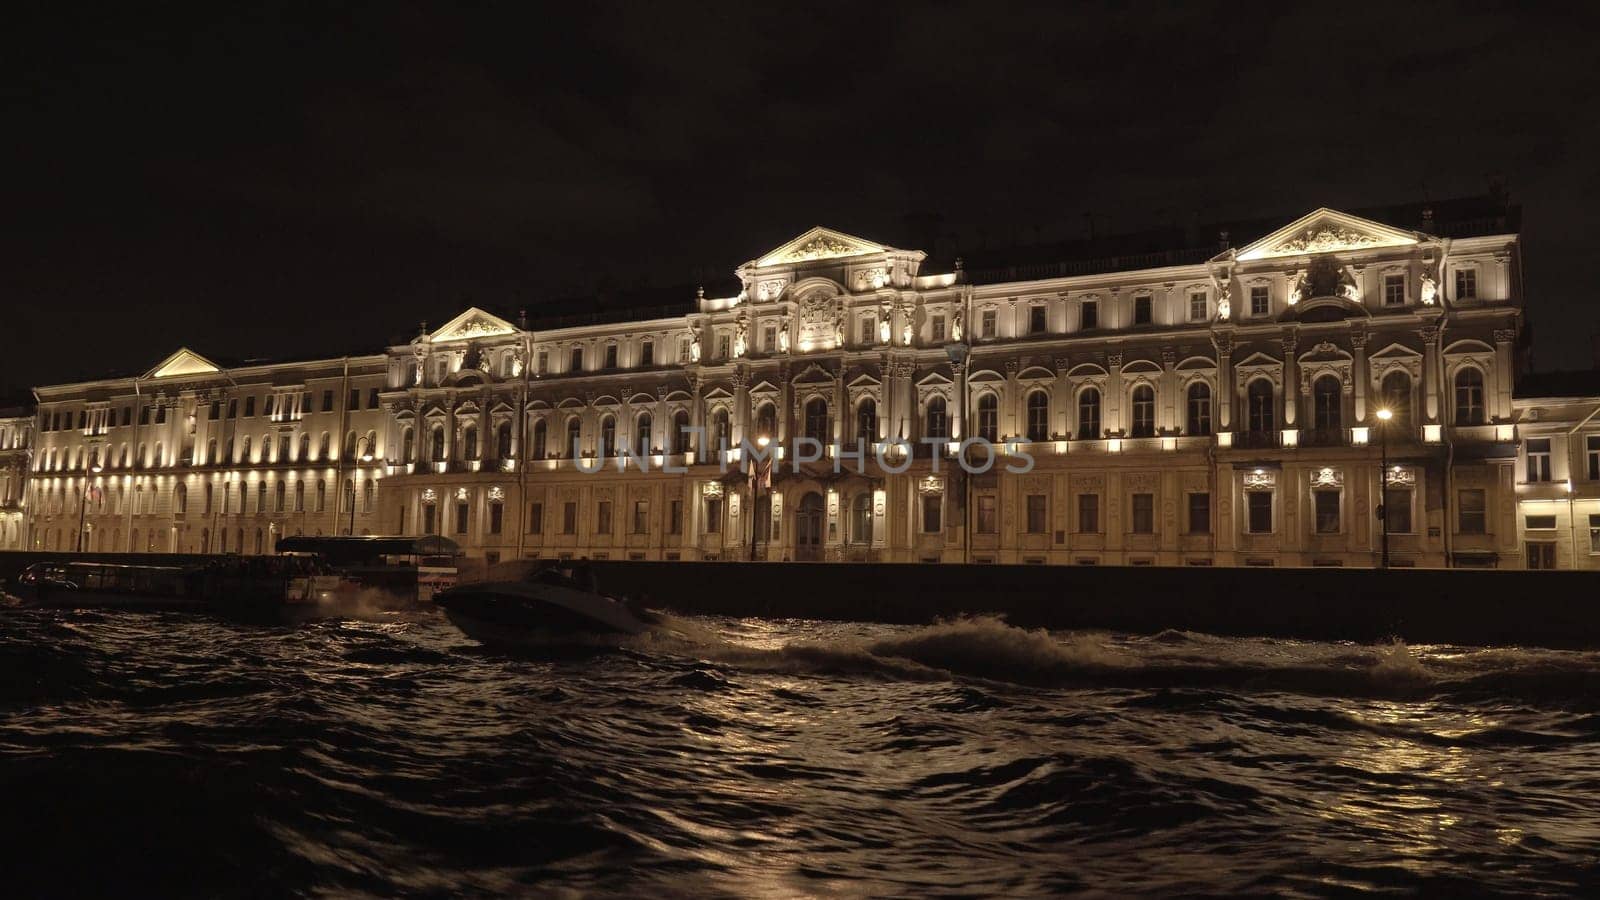 Night architecture in St. Petersburg view from the ferry. by DovidPro